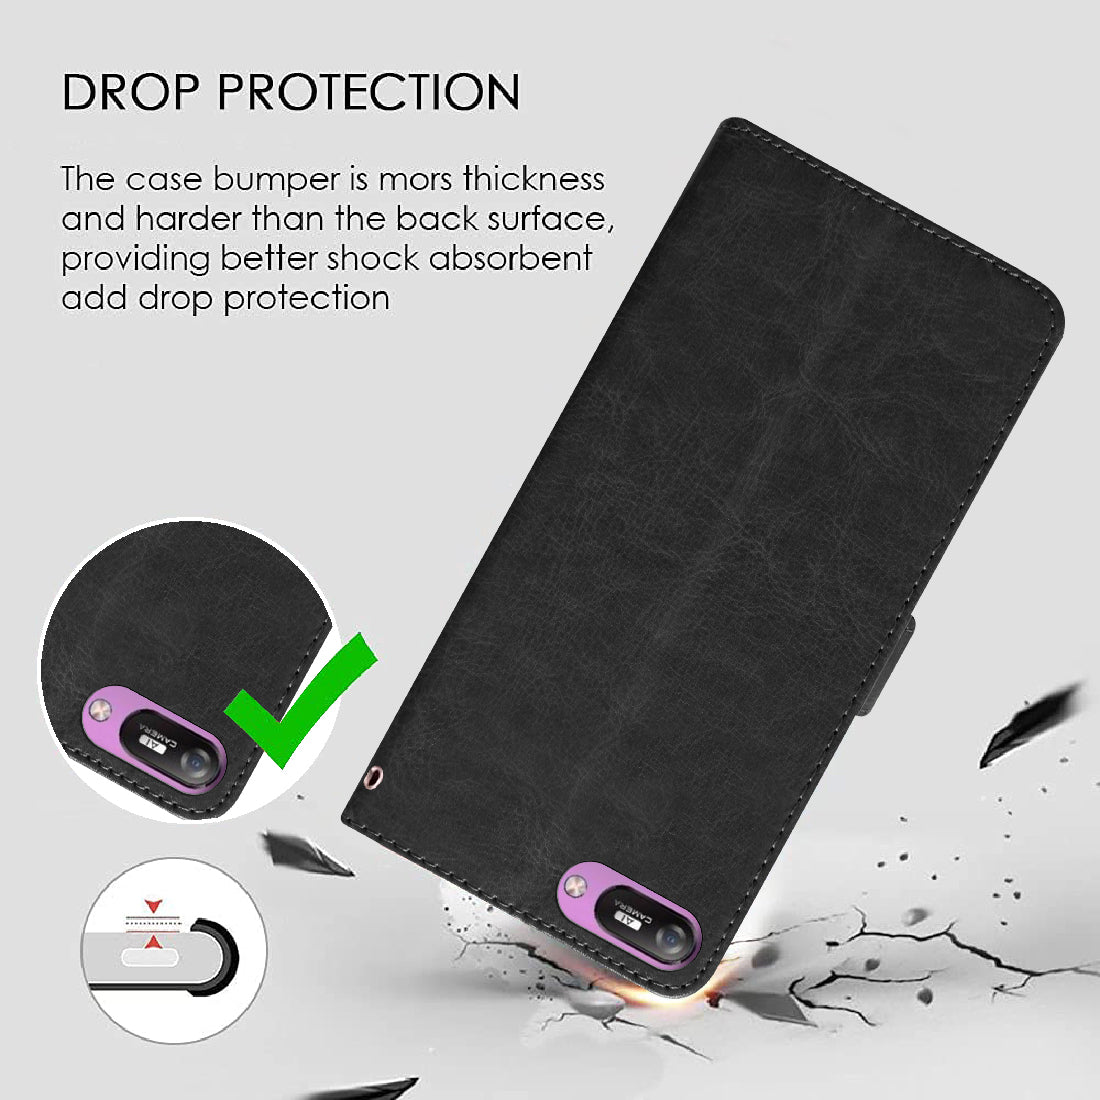 Premium Wallet Flip Cover for Itel A25 4G